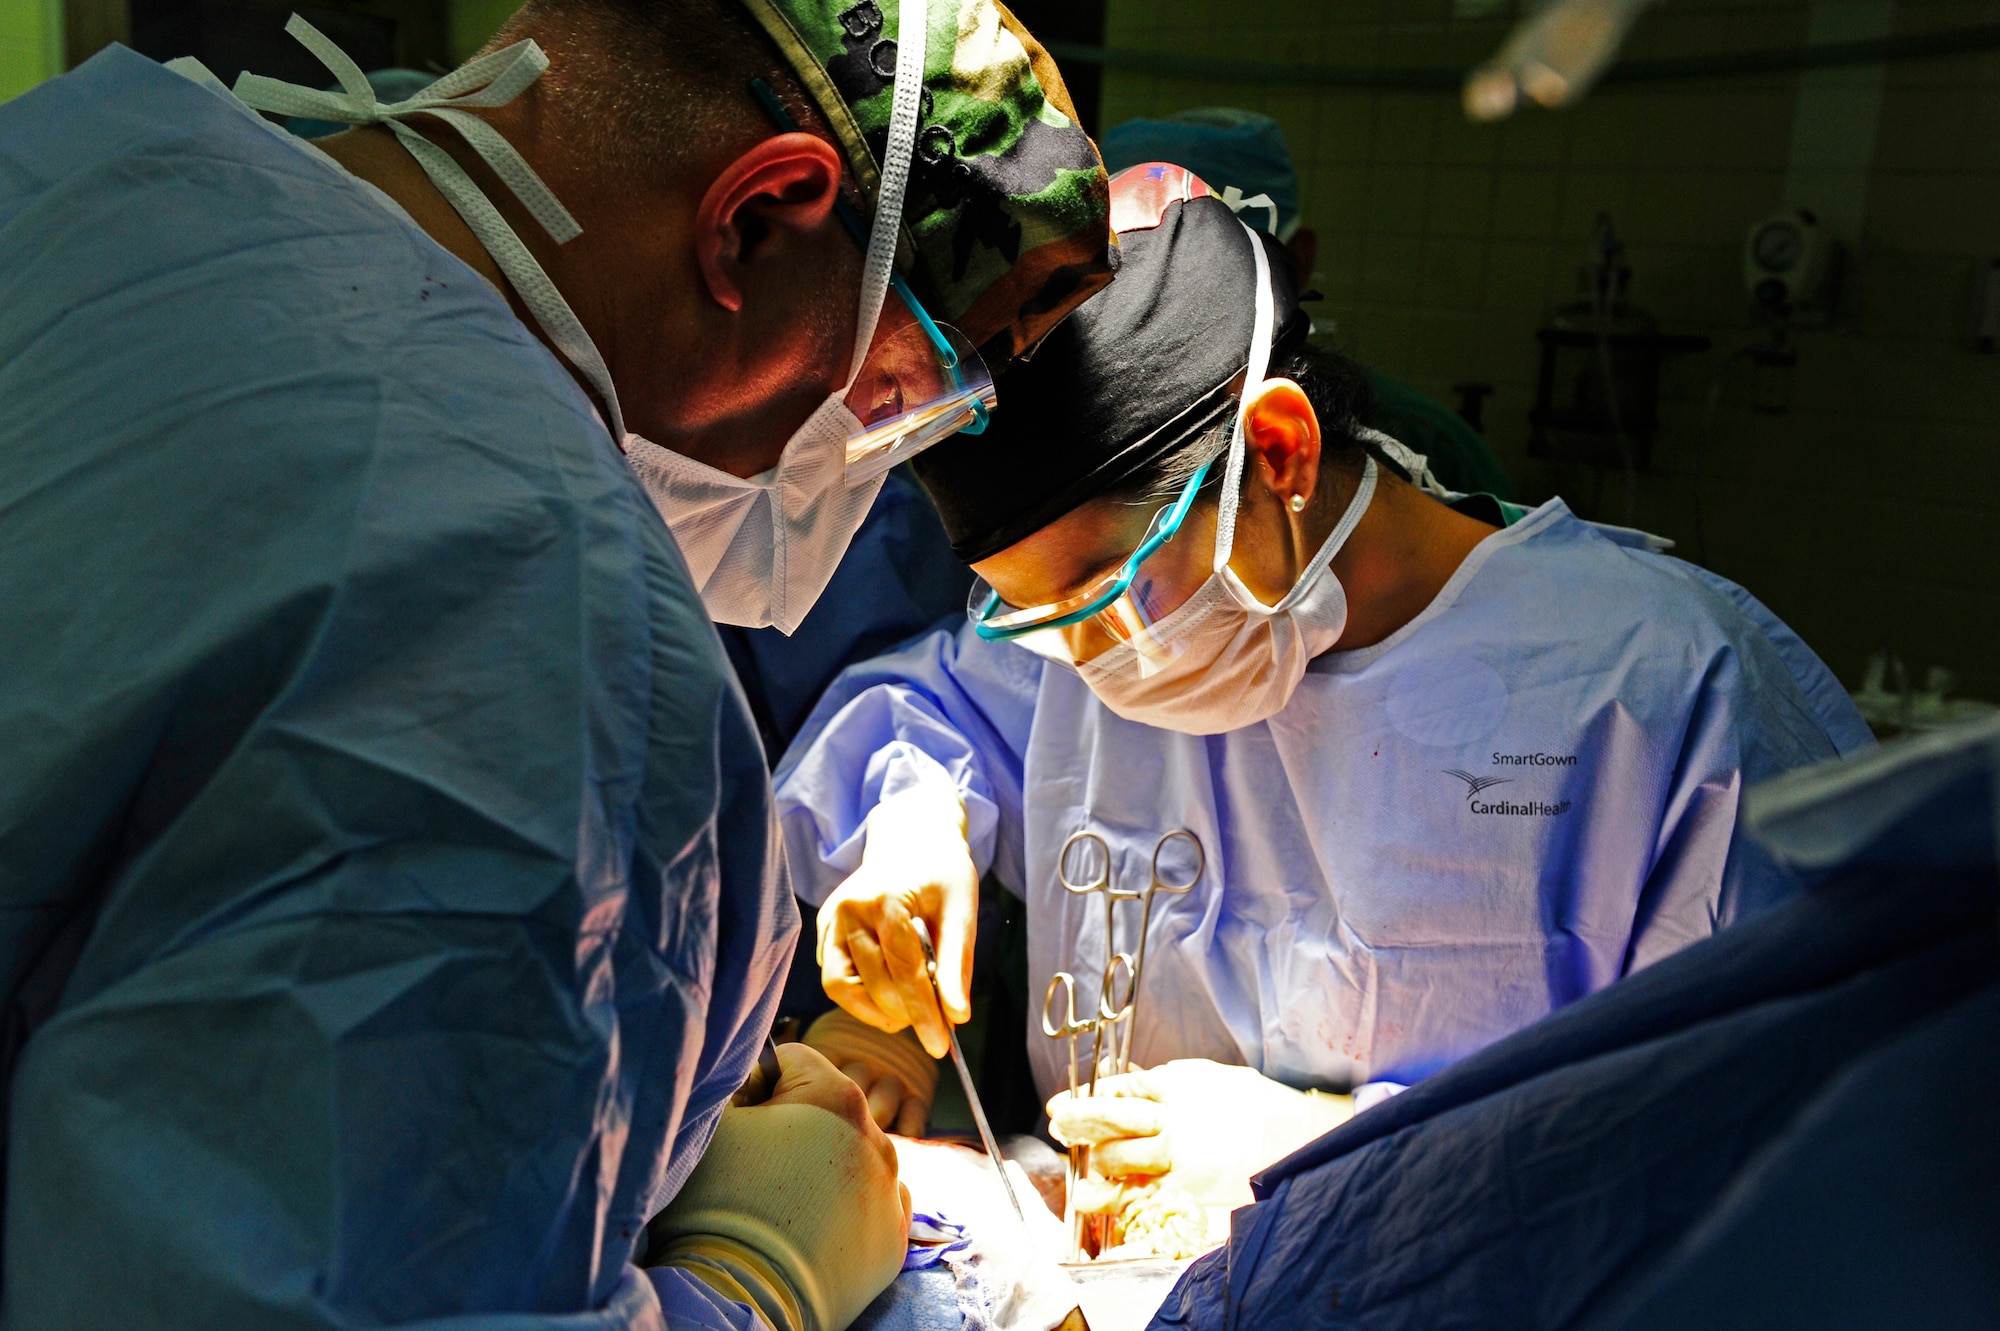 Army Maj. Charles Boggs, MST surgeon and Honduran Dr. Carolina Velez, third year surgery resident, perform surgery on a patient during a Surgical Medical Readiness Training exercise at Hospital Escuela in Tegucigalpa, April 23. (Air Force photo by Staff Sgt. Eric Donner)